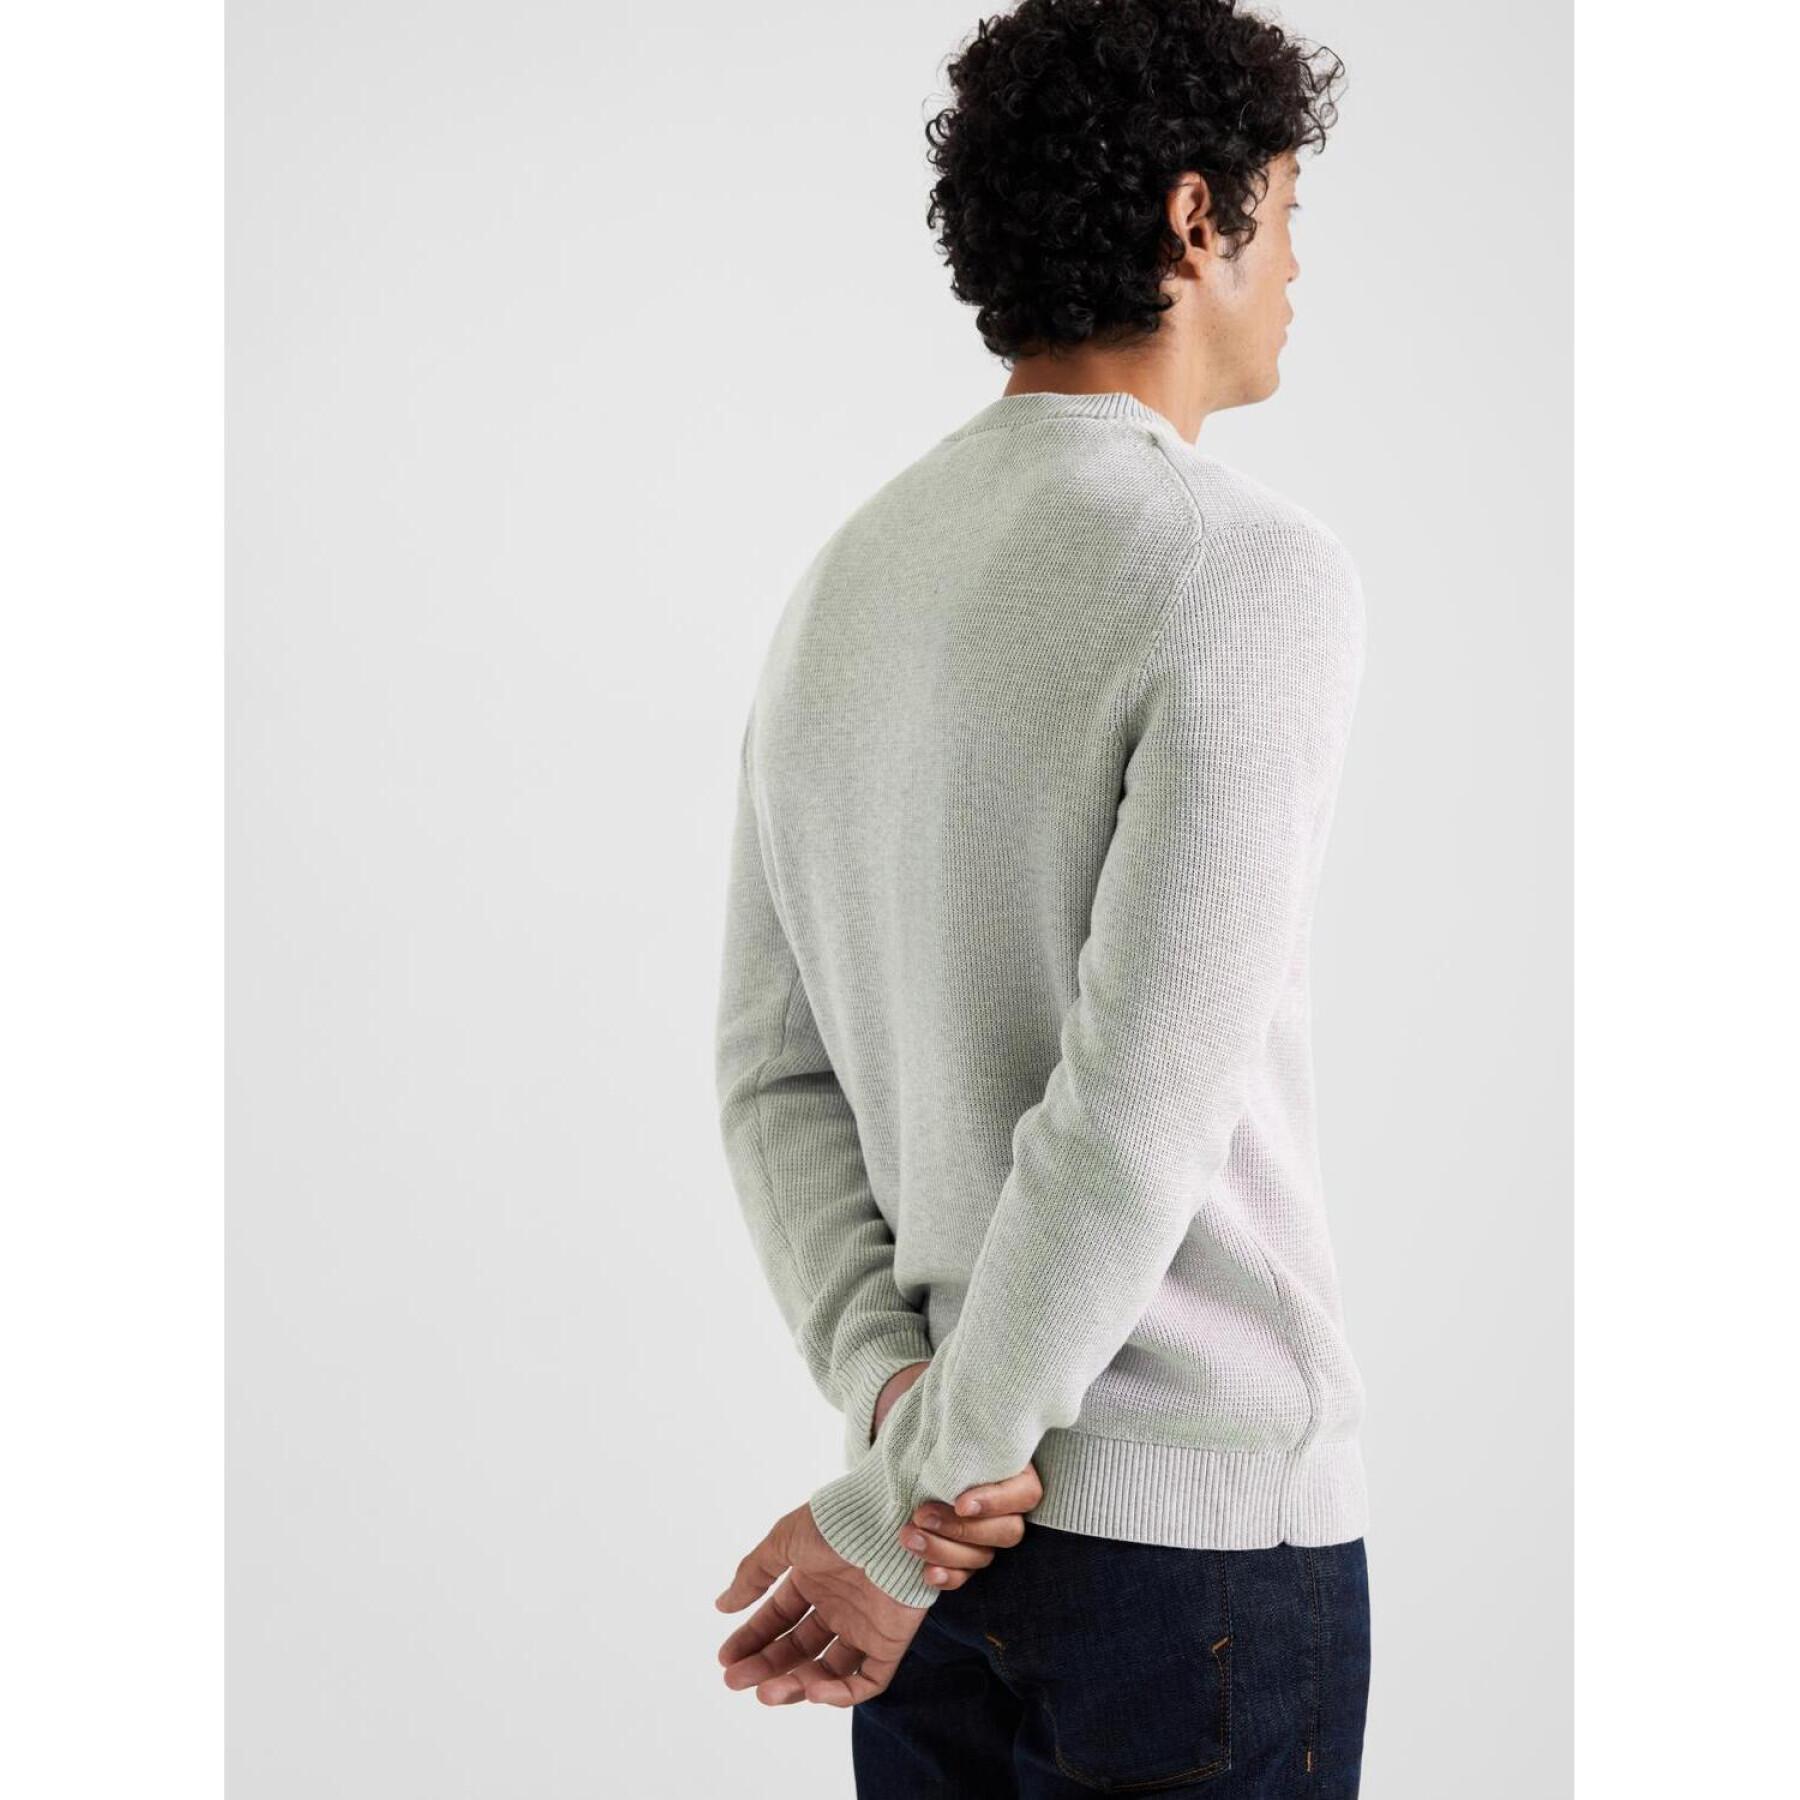 Round neck sweater Selected Dane